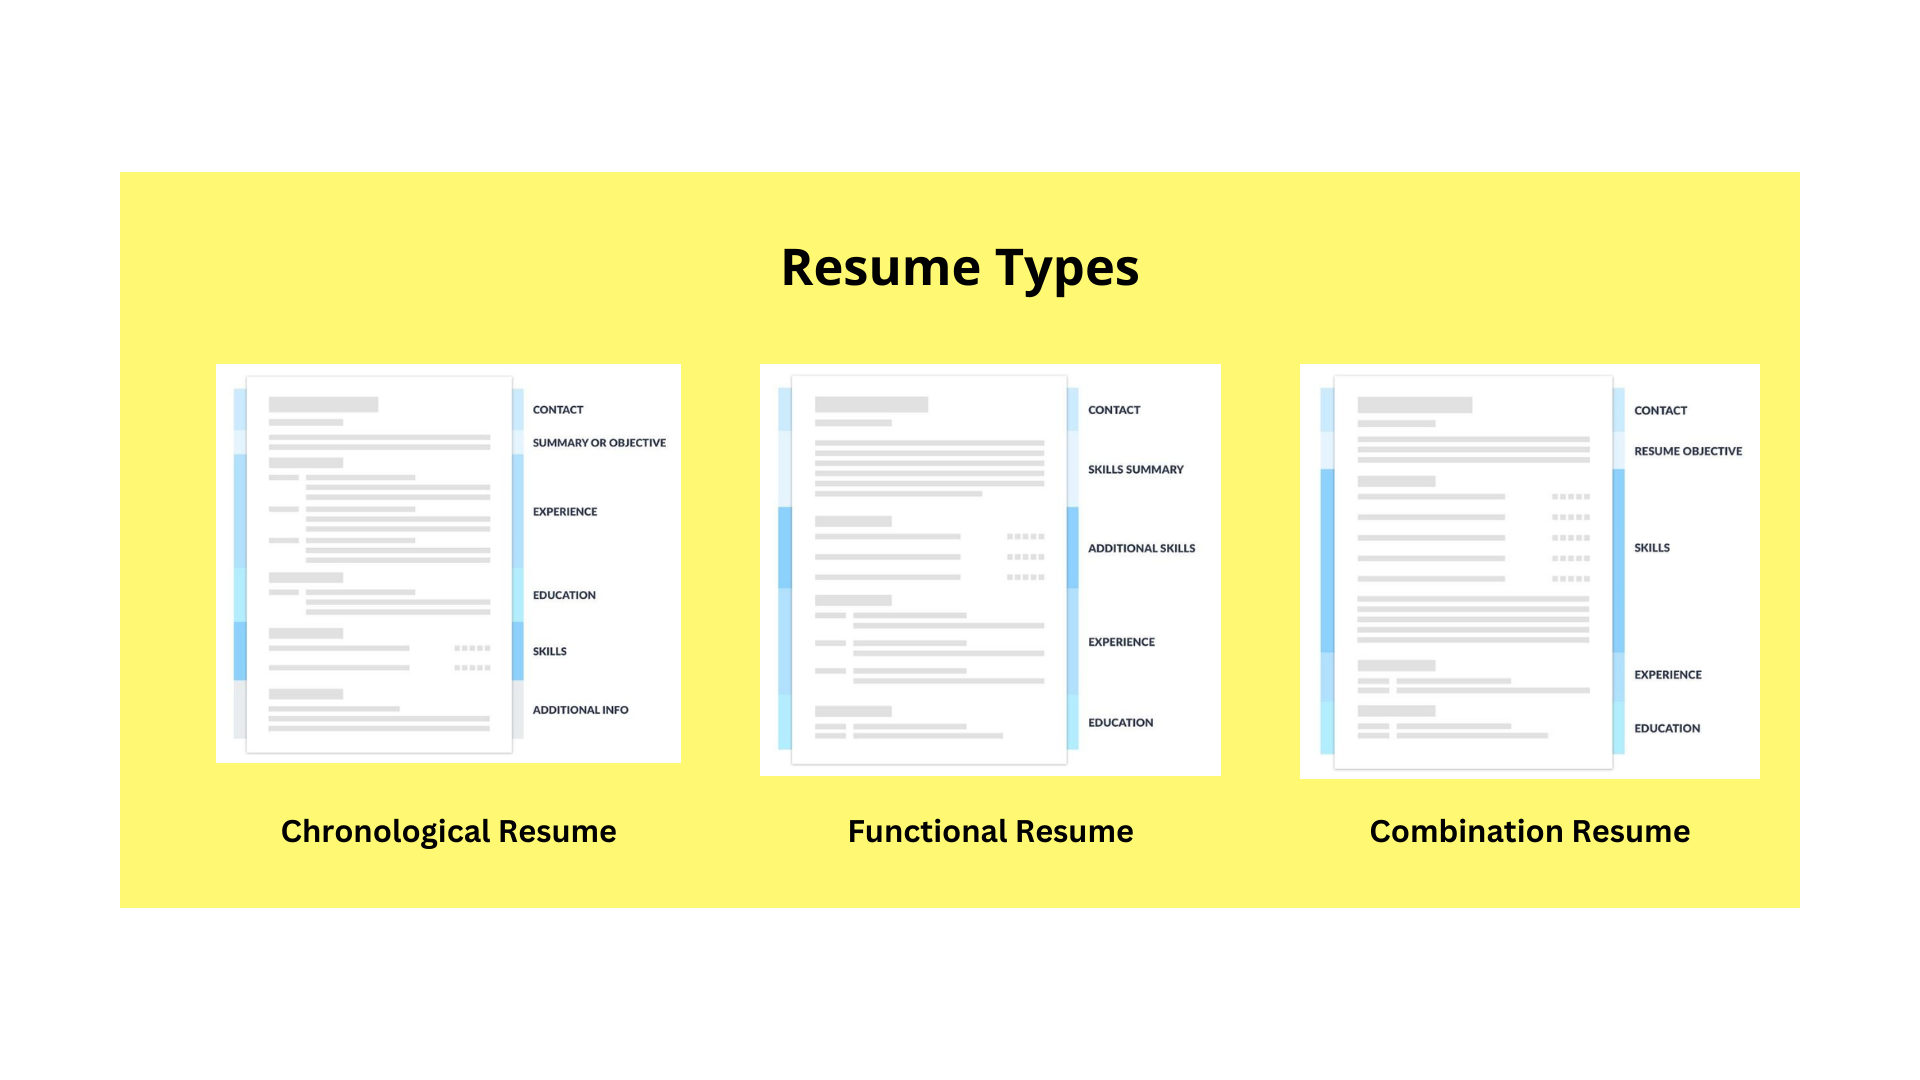 Types of Resumes